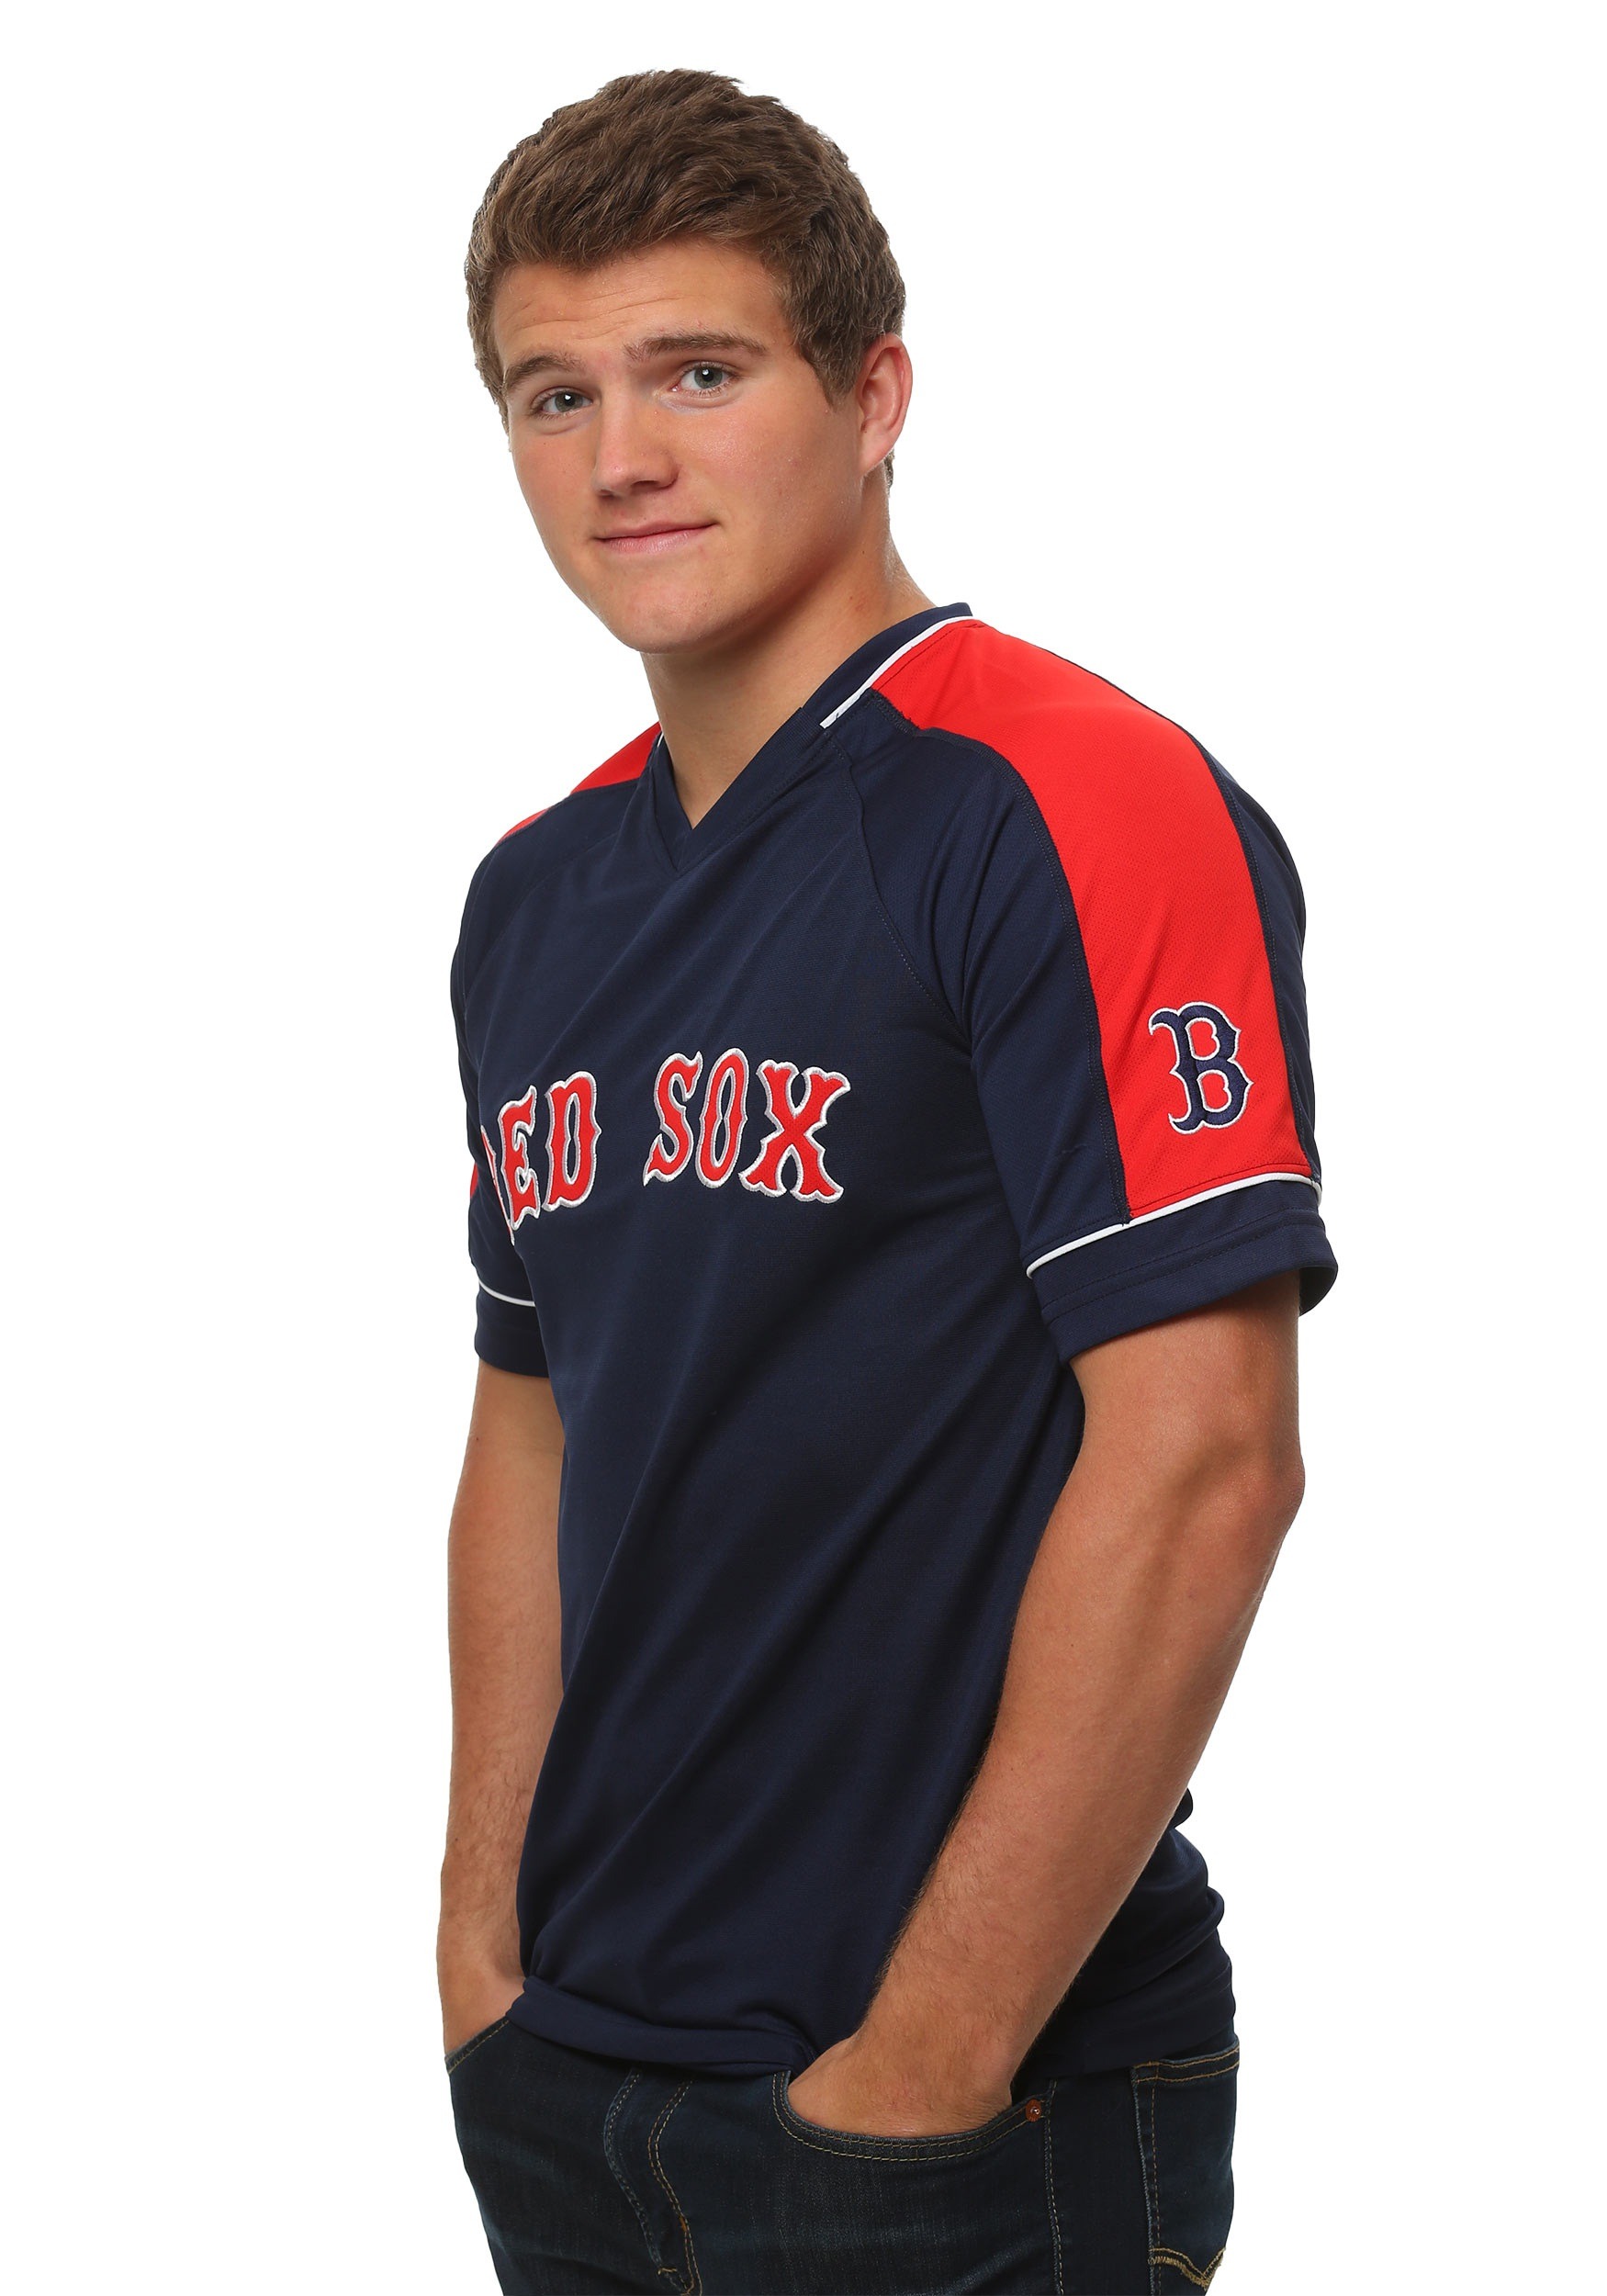 boston red sox jerseys for sale